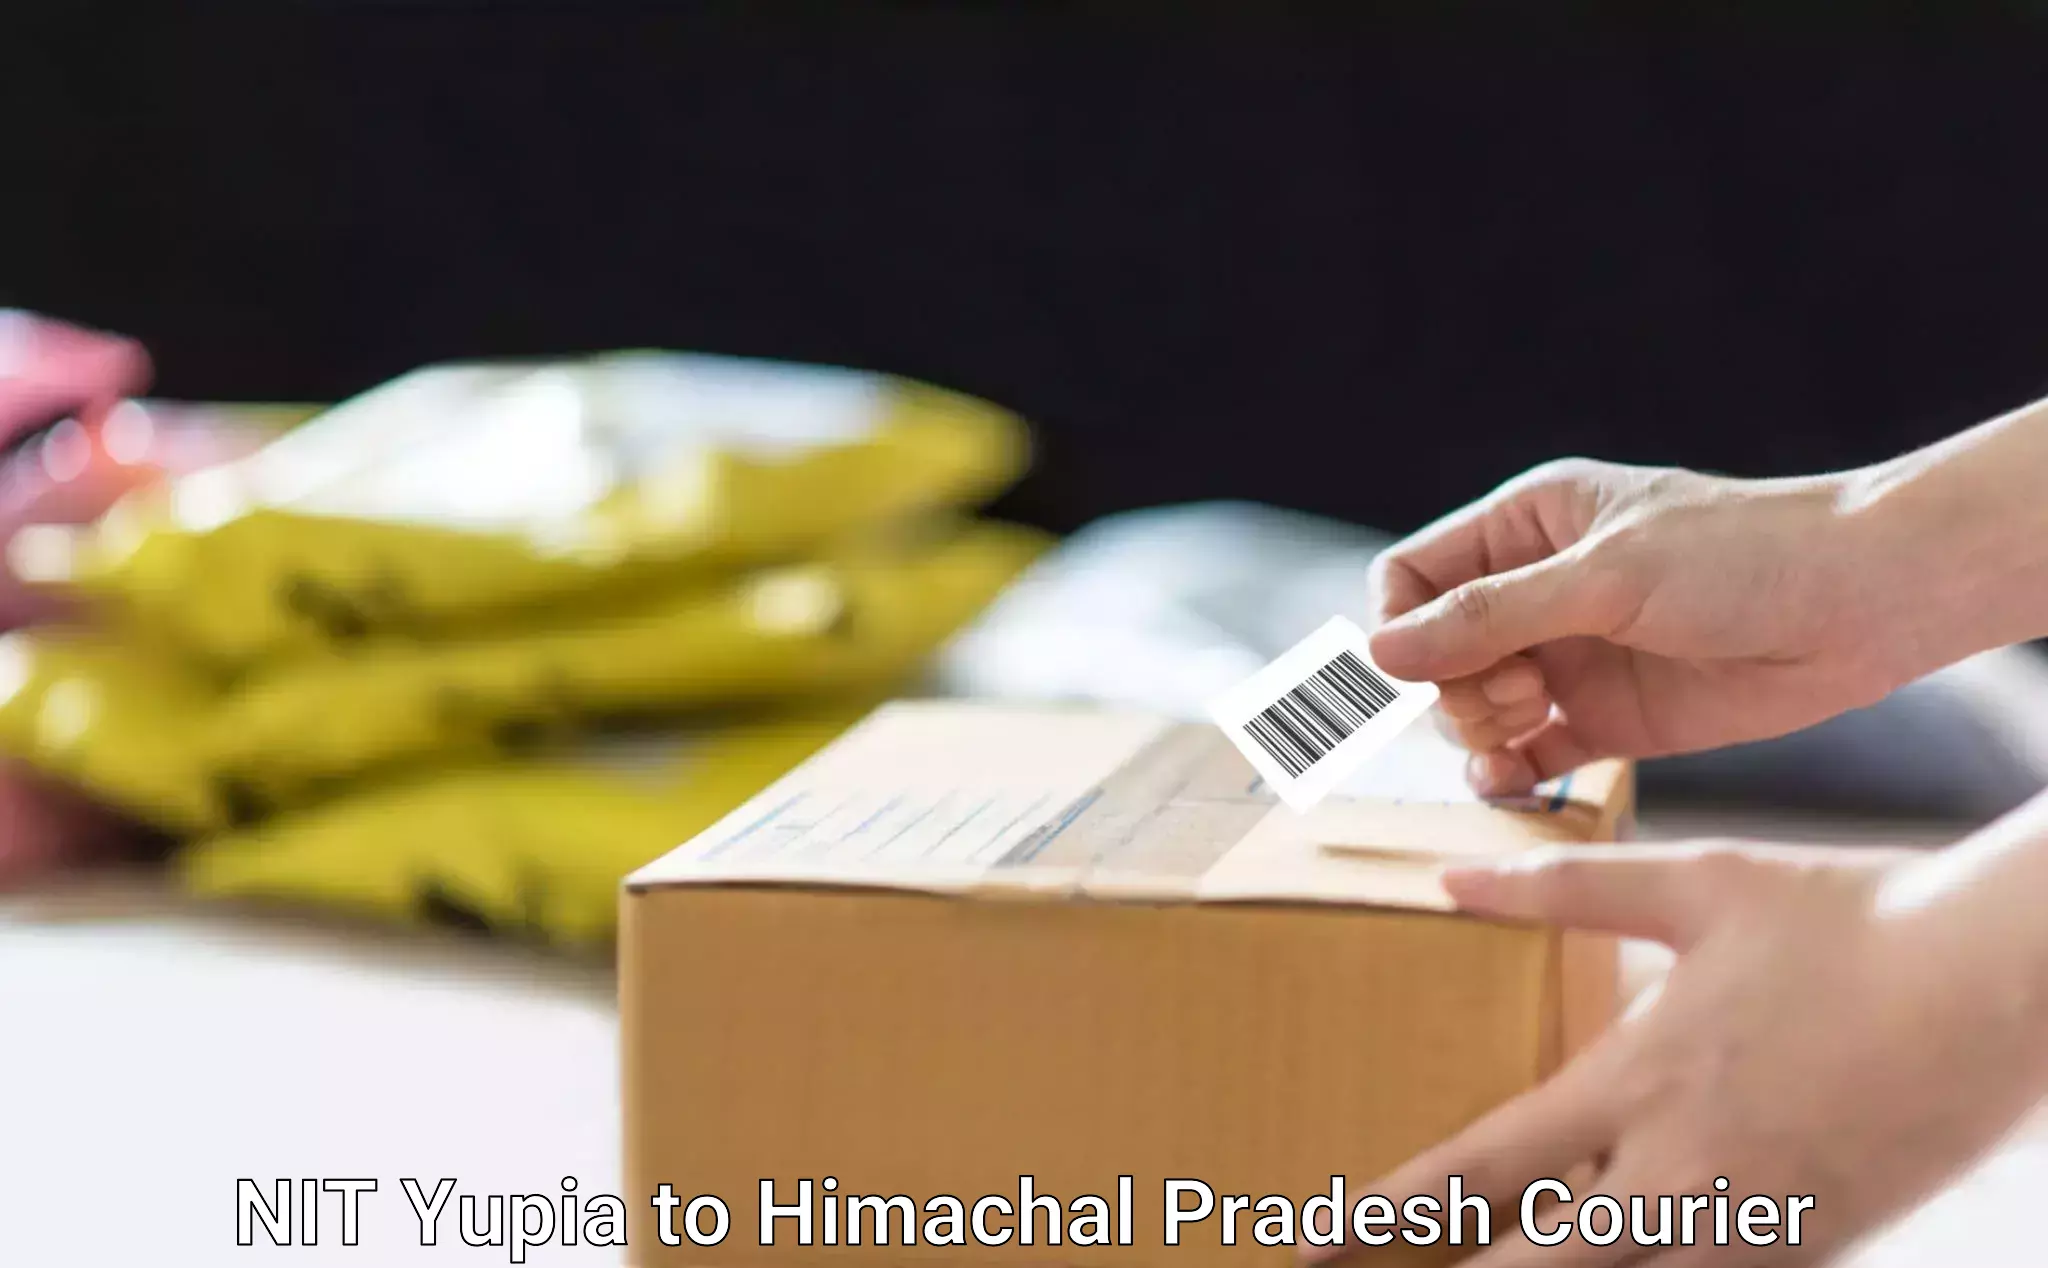 Personal parcel delivery in NIT Yupia to Chintpurni